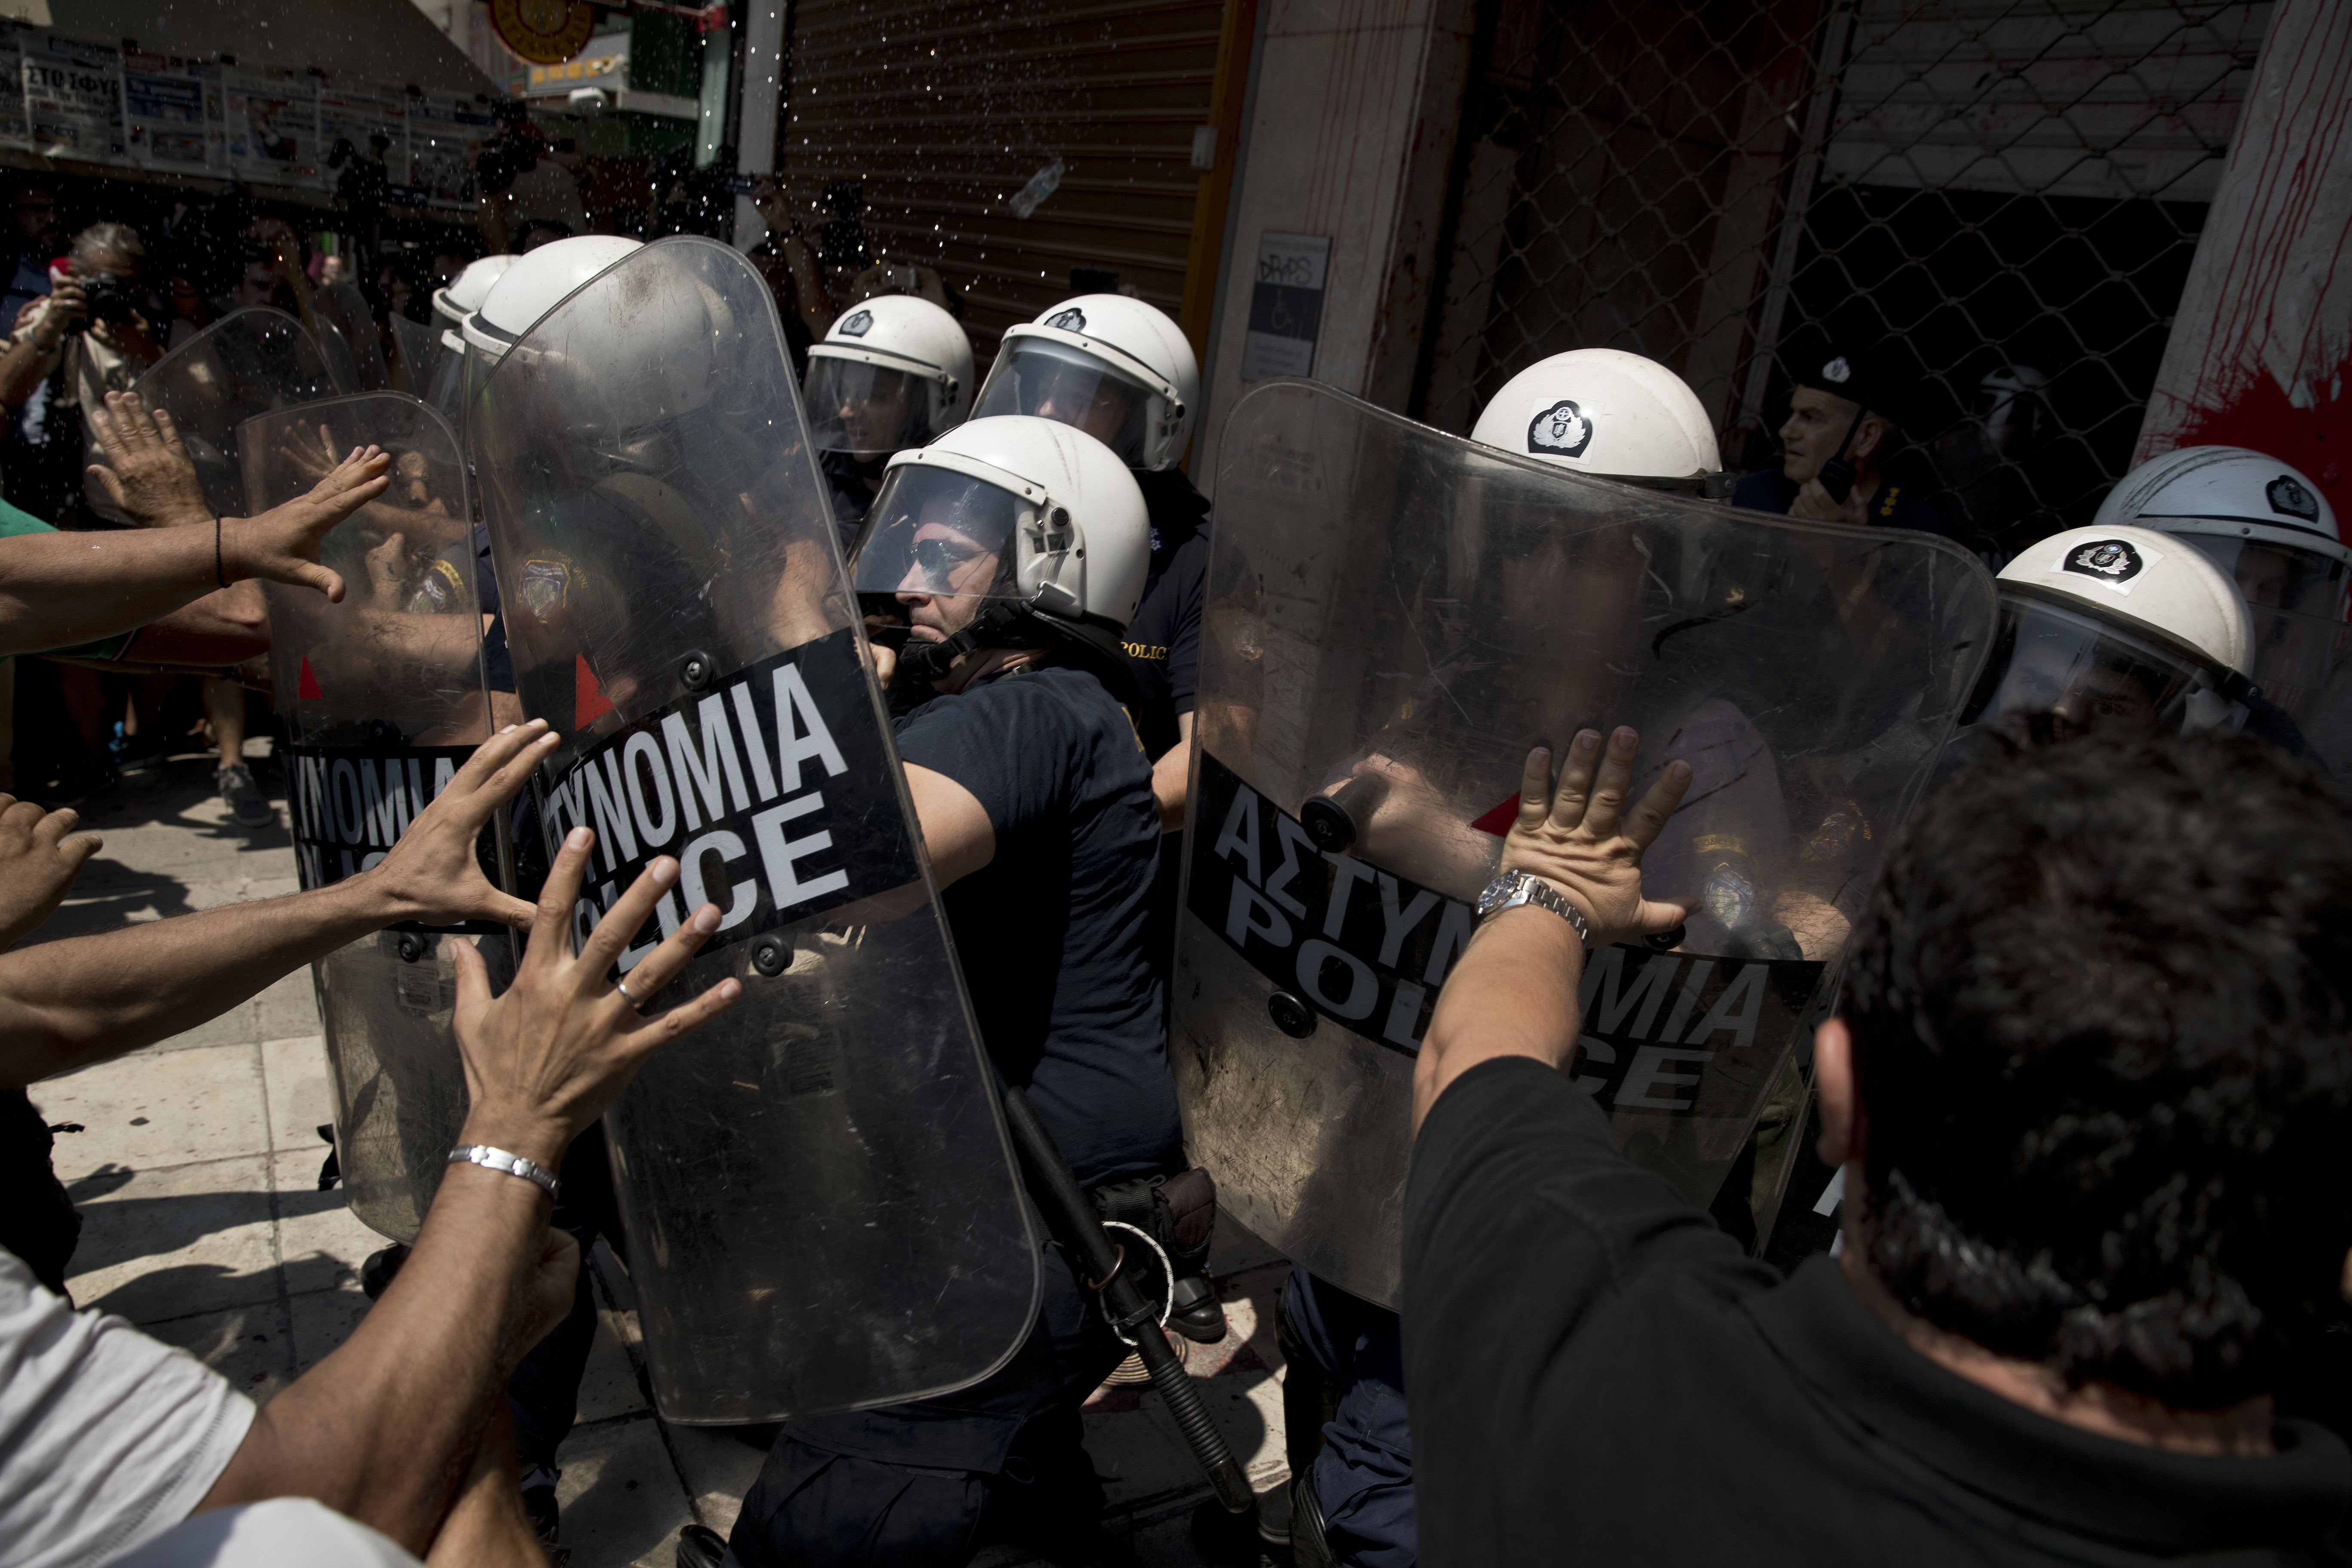 Striking municipal workers scuffle with riot police who are guarding the entrance of the Interior Ministry during a protest, in Athens, on Monday June 26, 2017. With a heat wave expected later this week, Greece's government Monday urging striking garbage collectors to return to work after a 10-day protest has left huge piles of trash around Athens. (AP Photo/Petros Giannakouris)